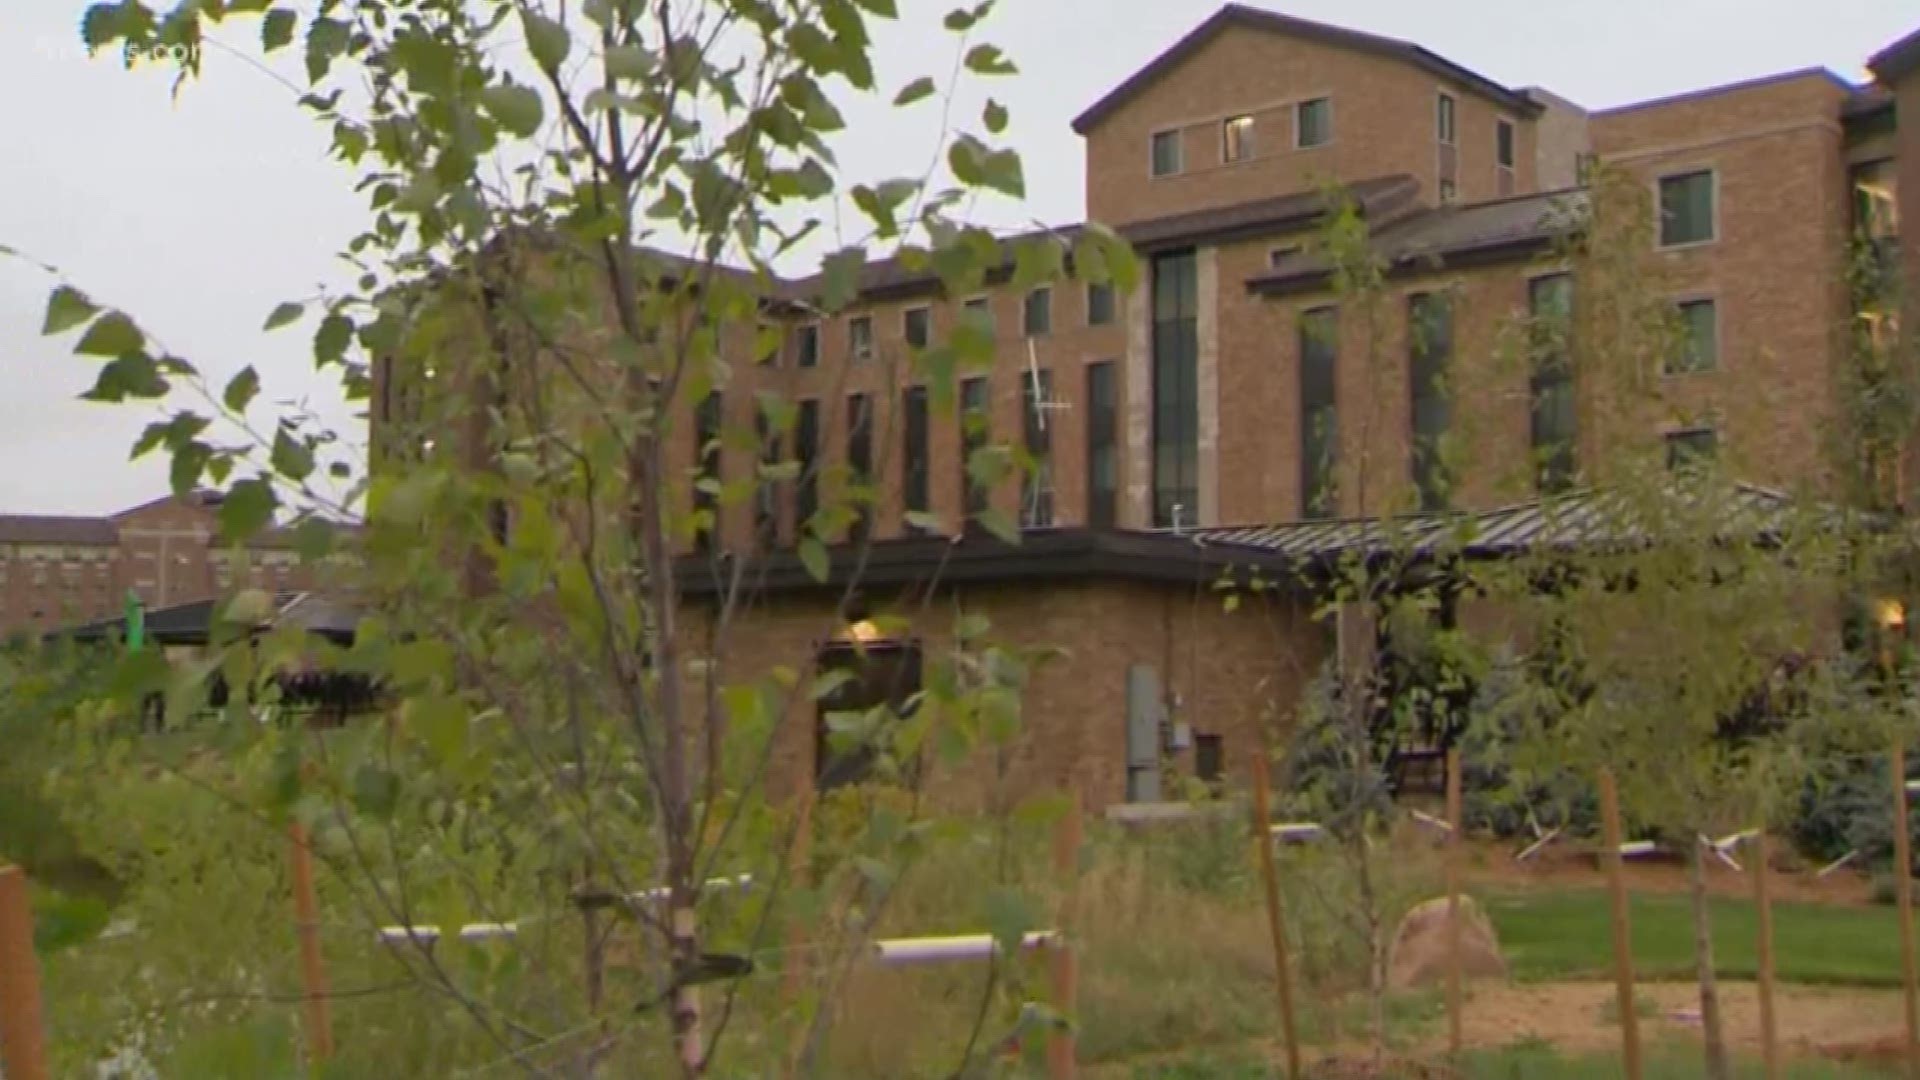 Students at the University of Colorado at Boulder's Class of 2023 are moving in on Wednesday, August 21, 2019 for the start of the fall semester. 9NEWS reporter Alli Levine is at CU's Williams Village where the tearful goodbyes will take place later Wednesday.